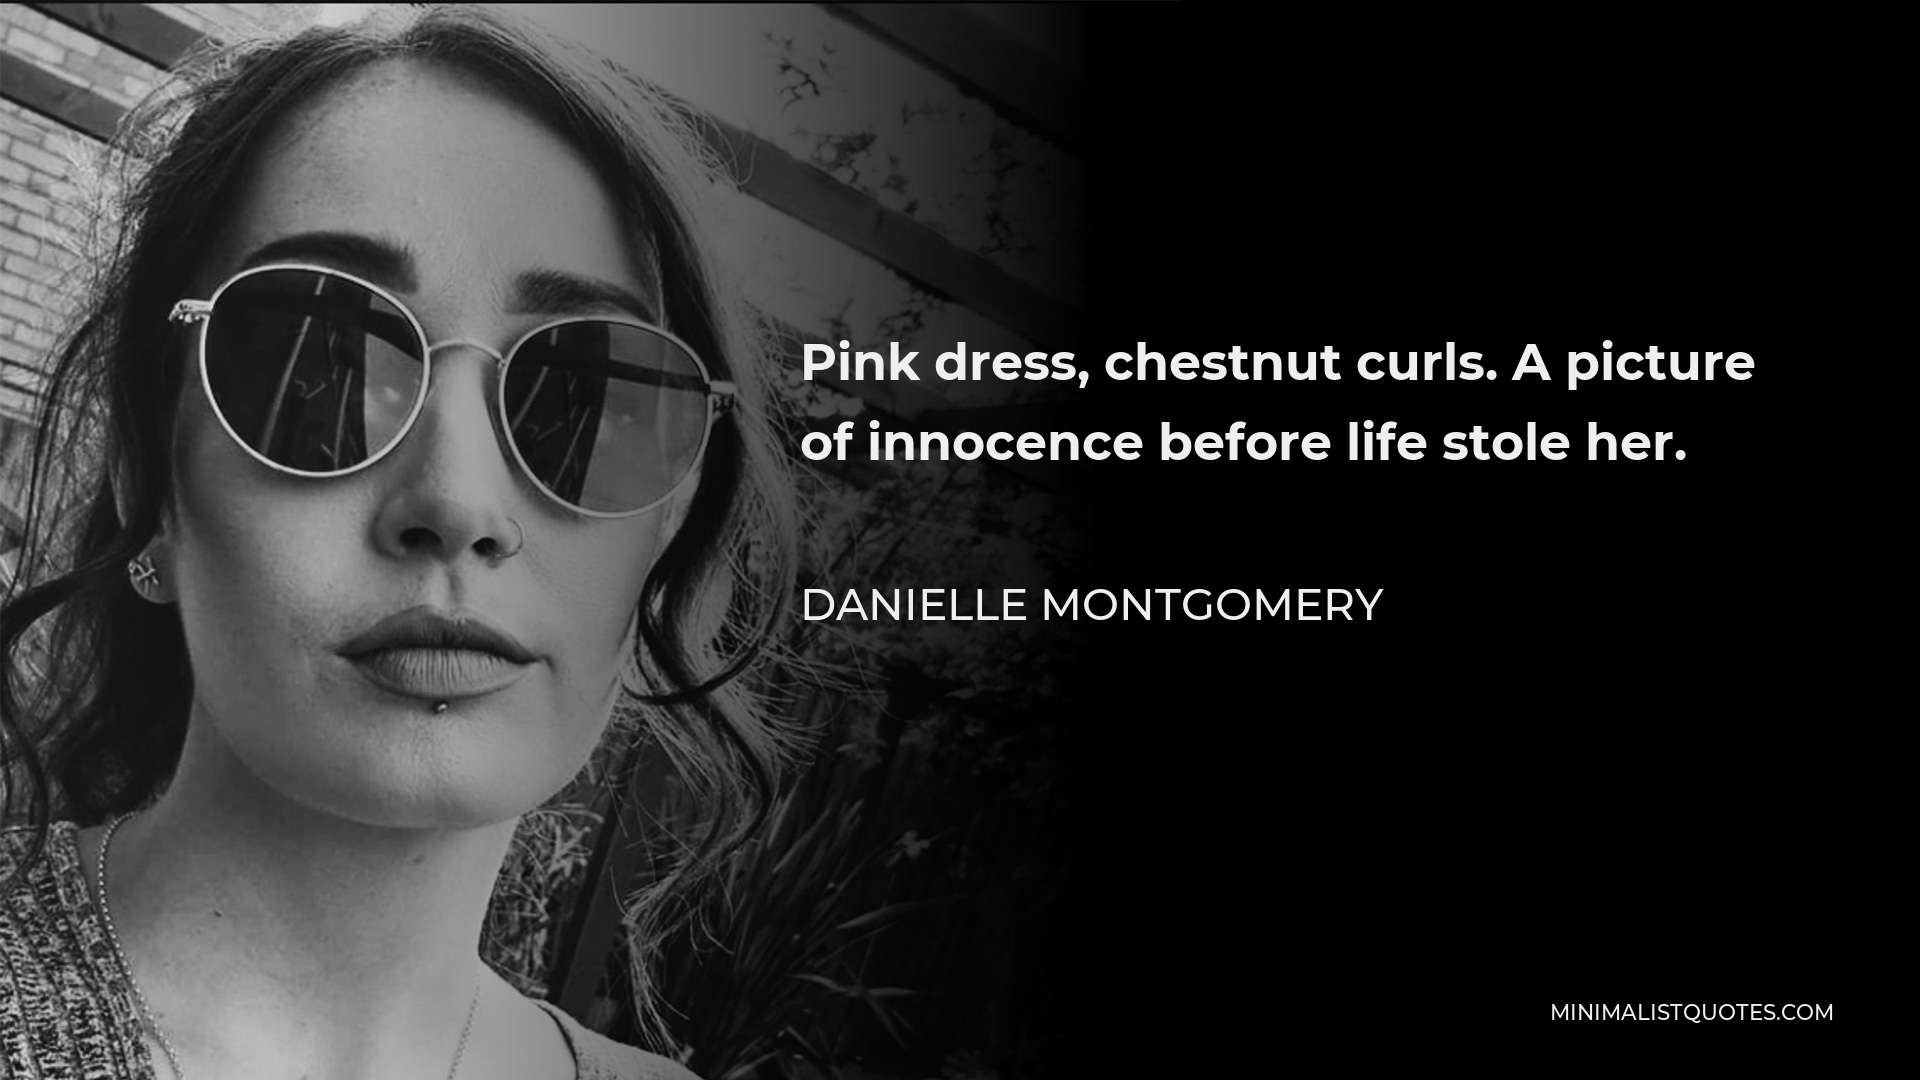 Danielle Montgomery Quote - Pink dress, chestnut curls. A picture of innocence before life stole her.